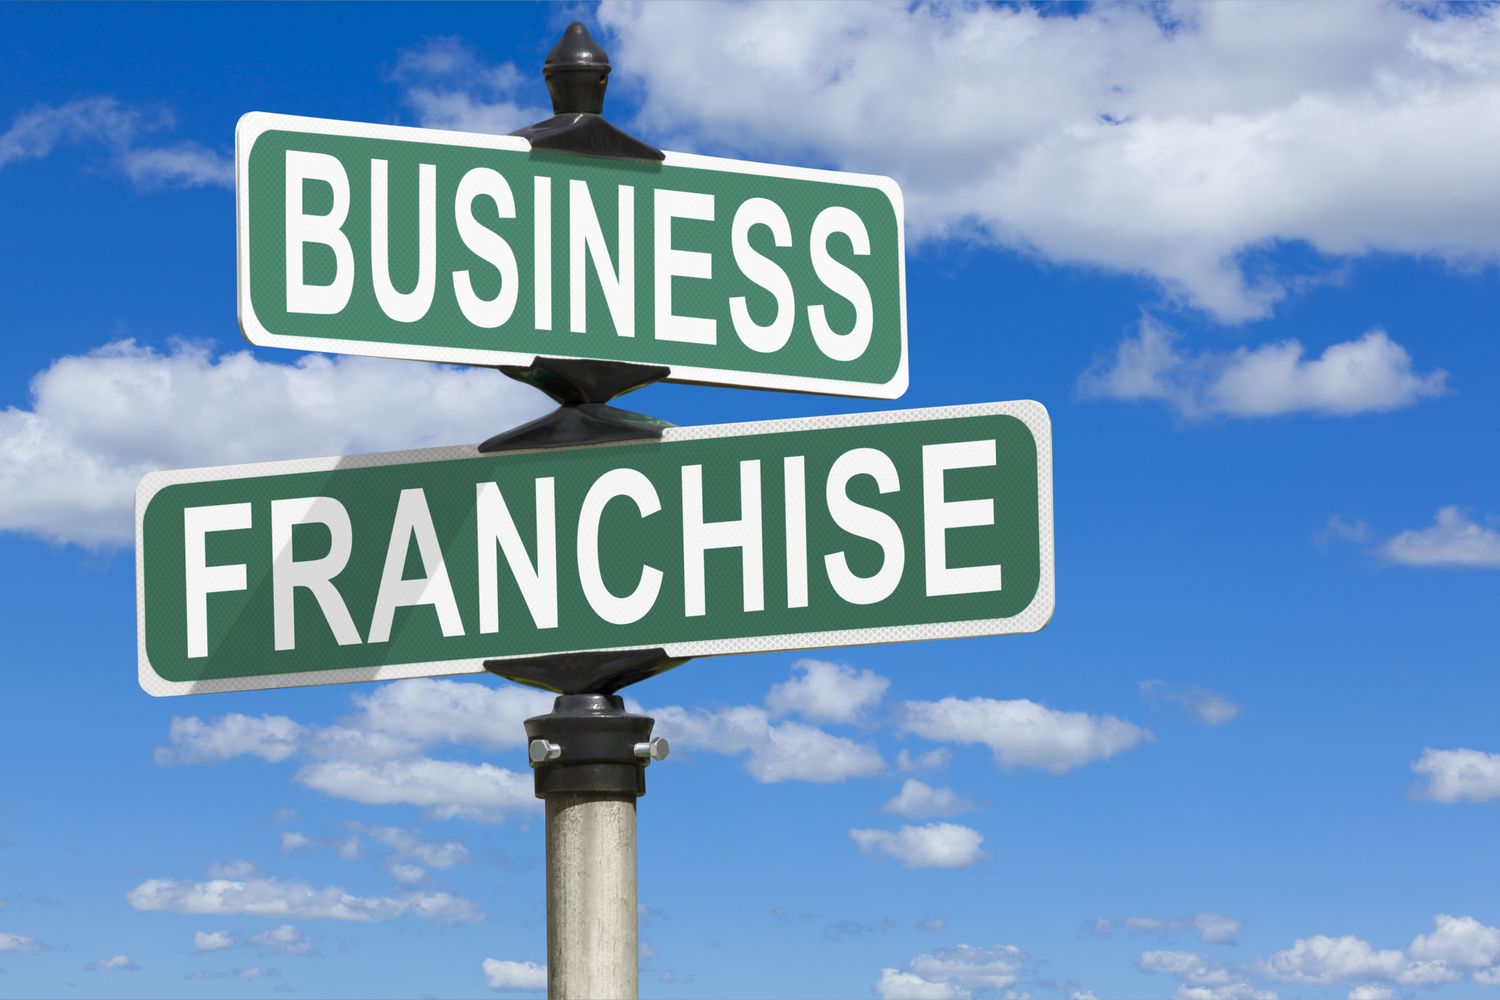 Read more about the article Franchise的译法：权利、经营模式还是产品？